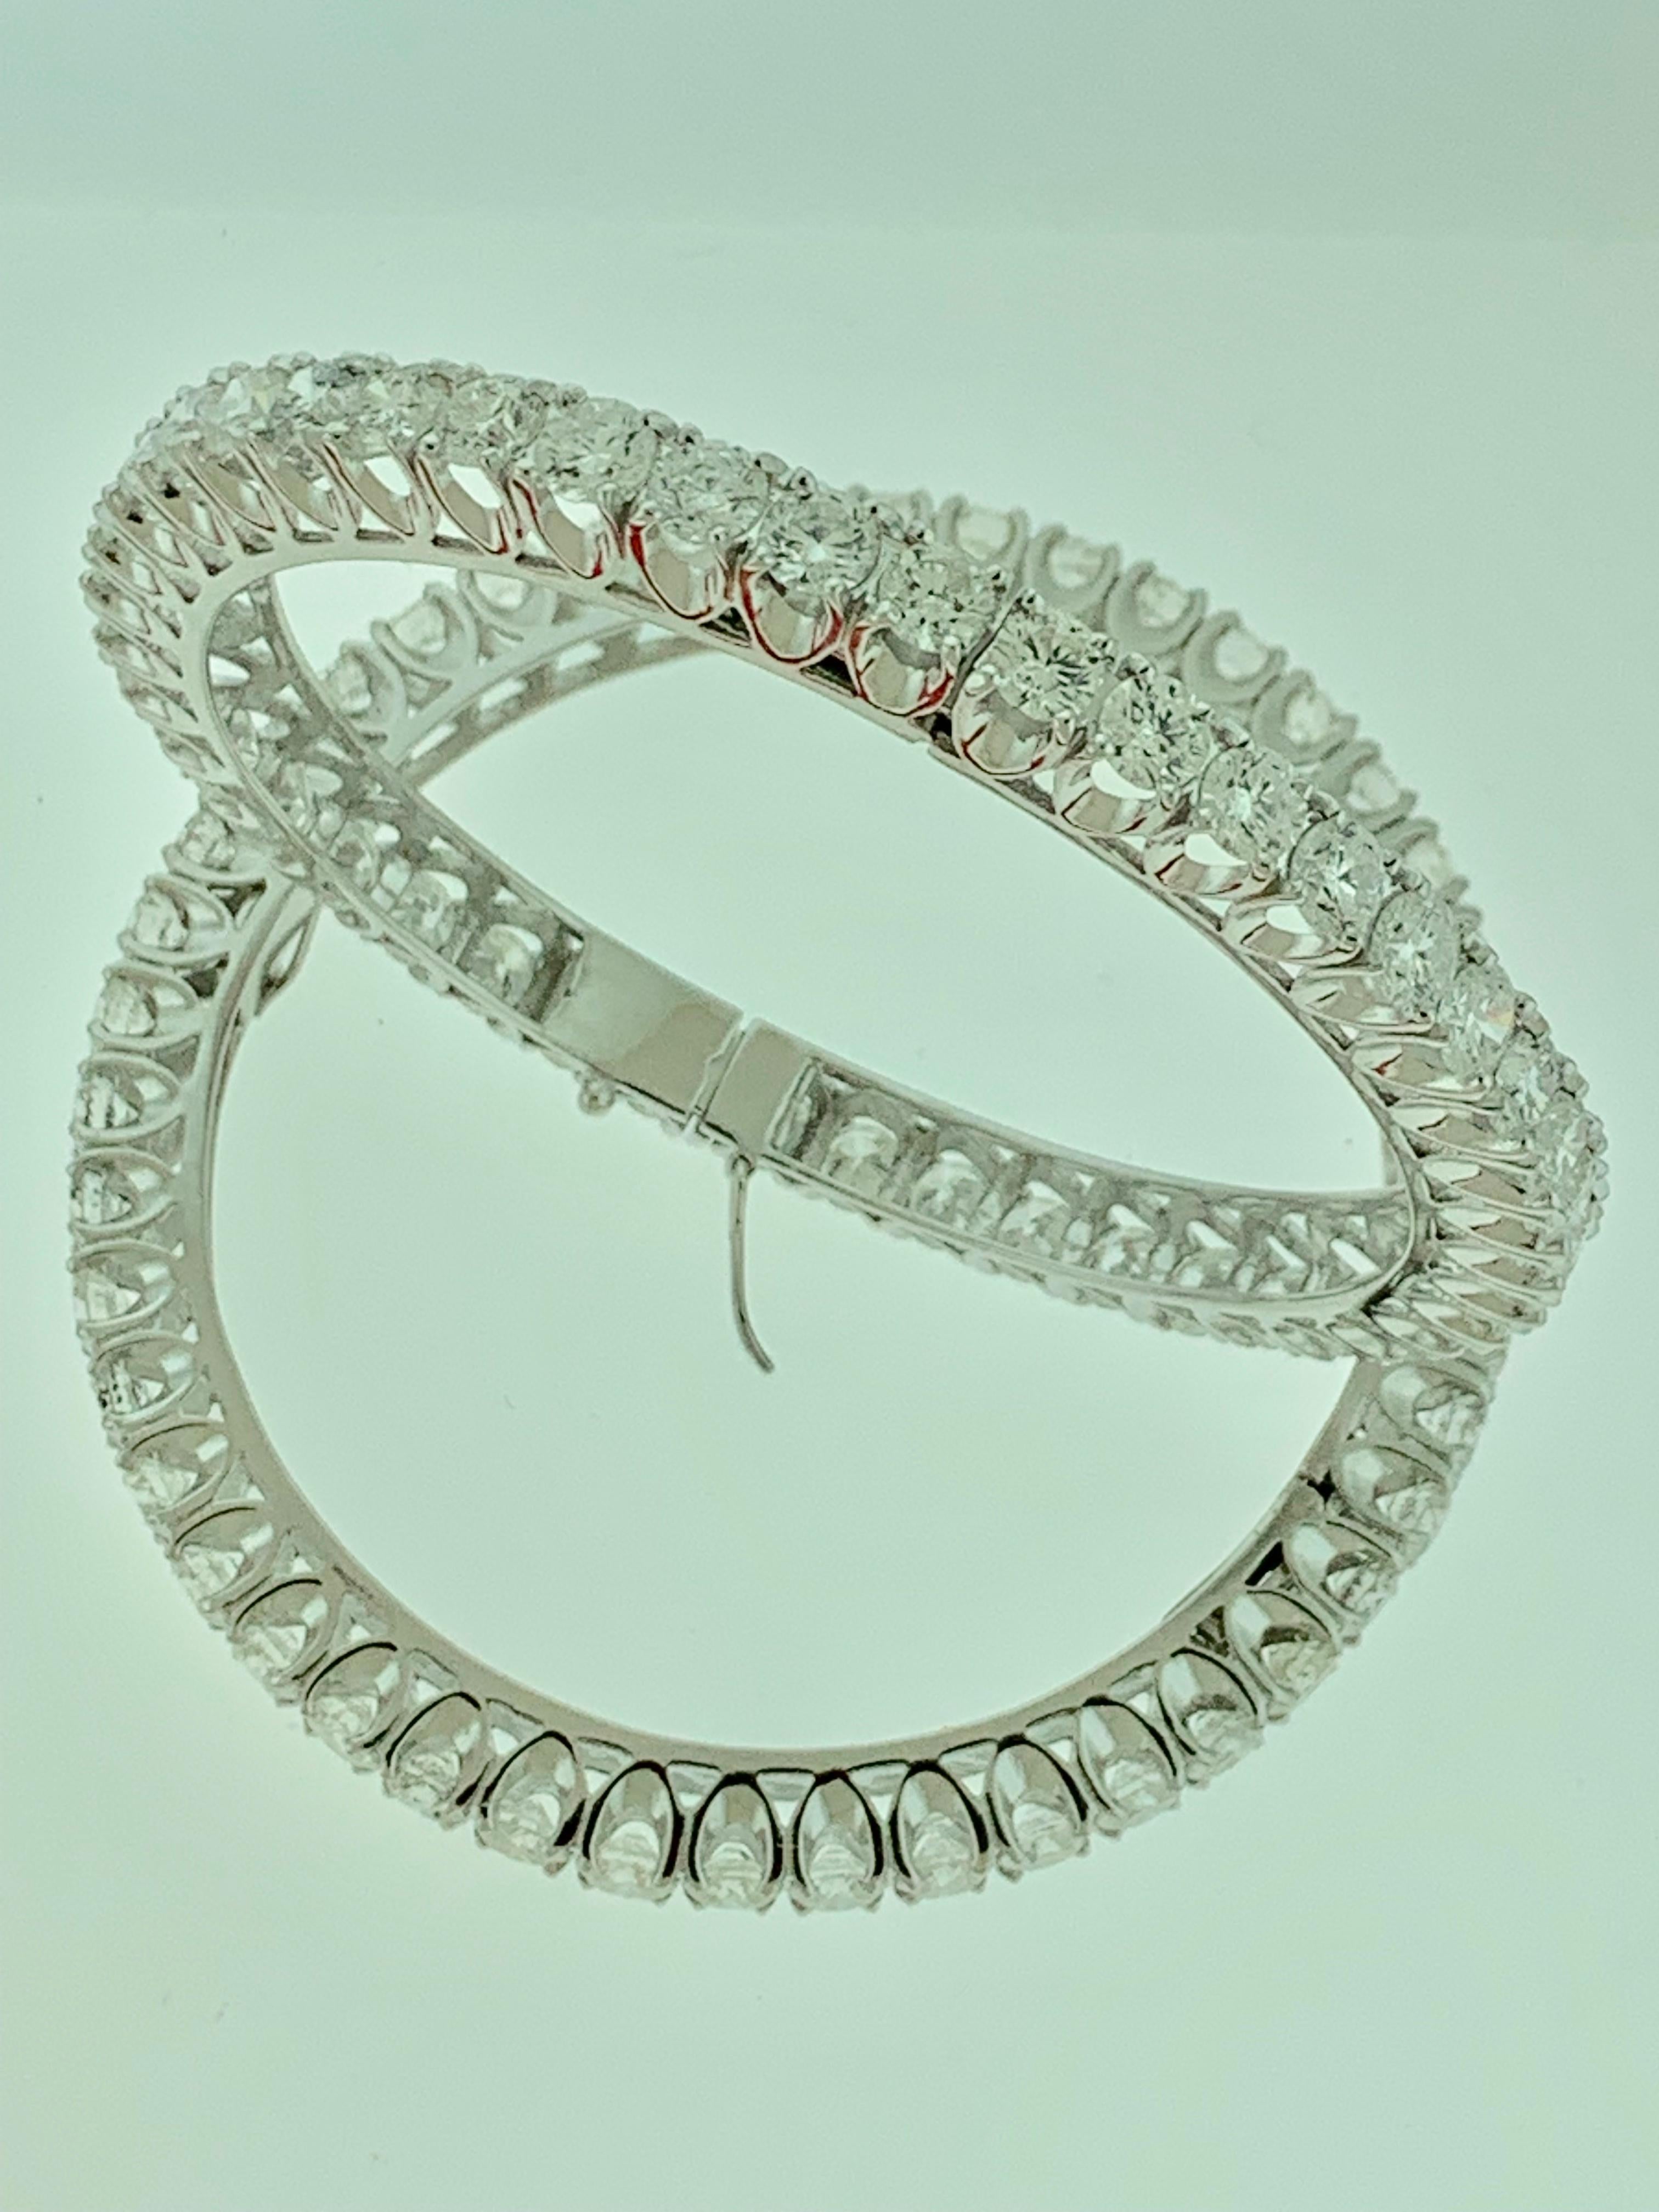 40 Pointer Each, 36 Ct Single line Eternity 18 Kt Gold and Diamond Bangle, Pair 4